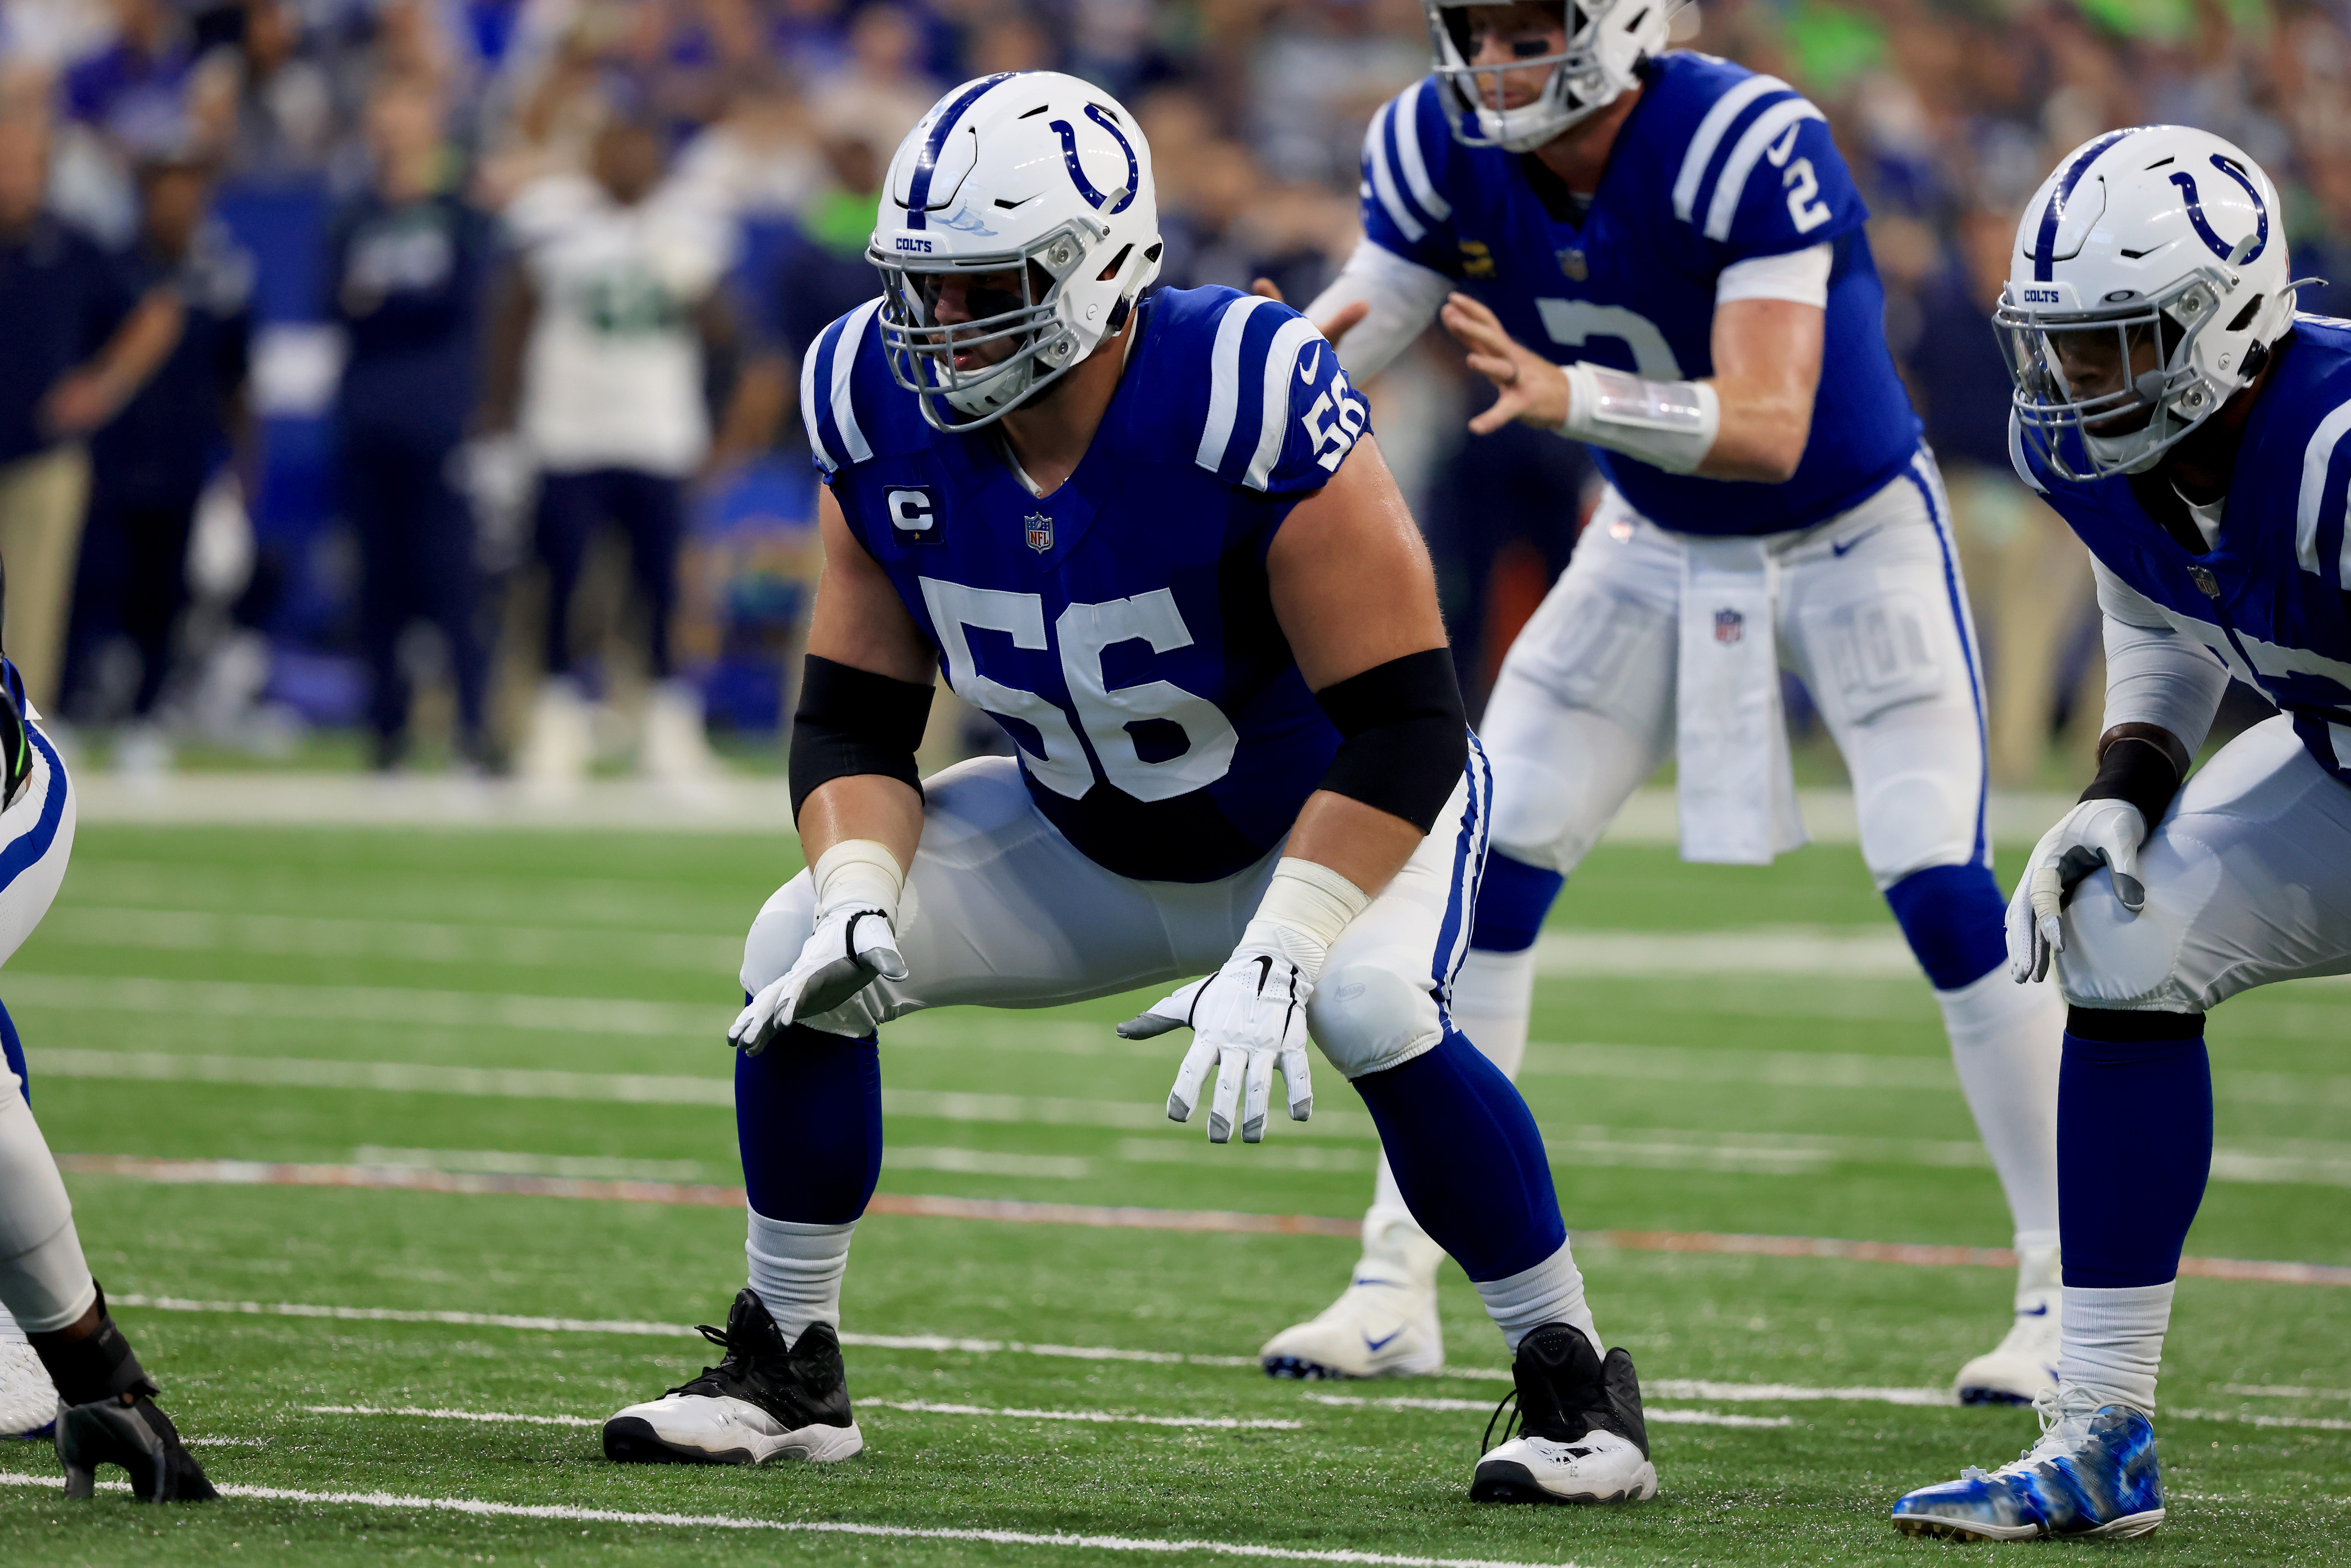 Colts guard Quenton Nelson blocks for Jonathan Taylor and the Colts offense